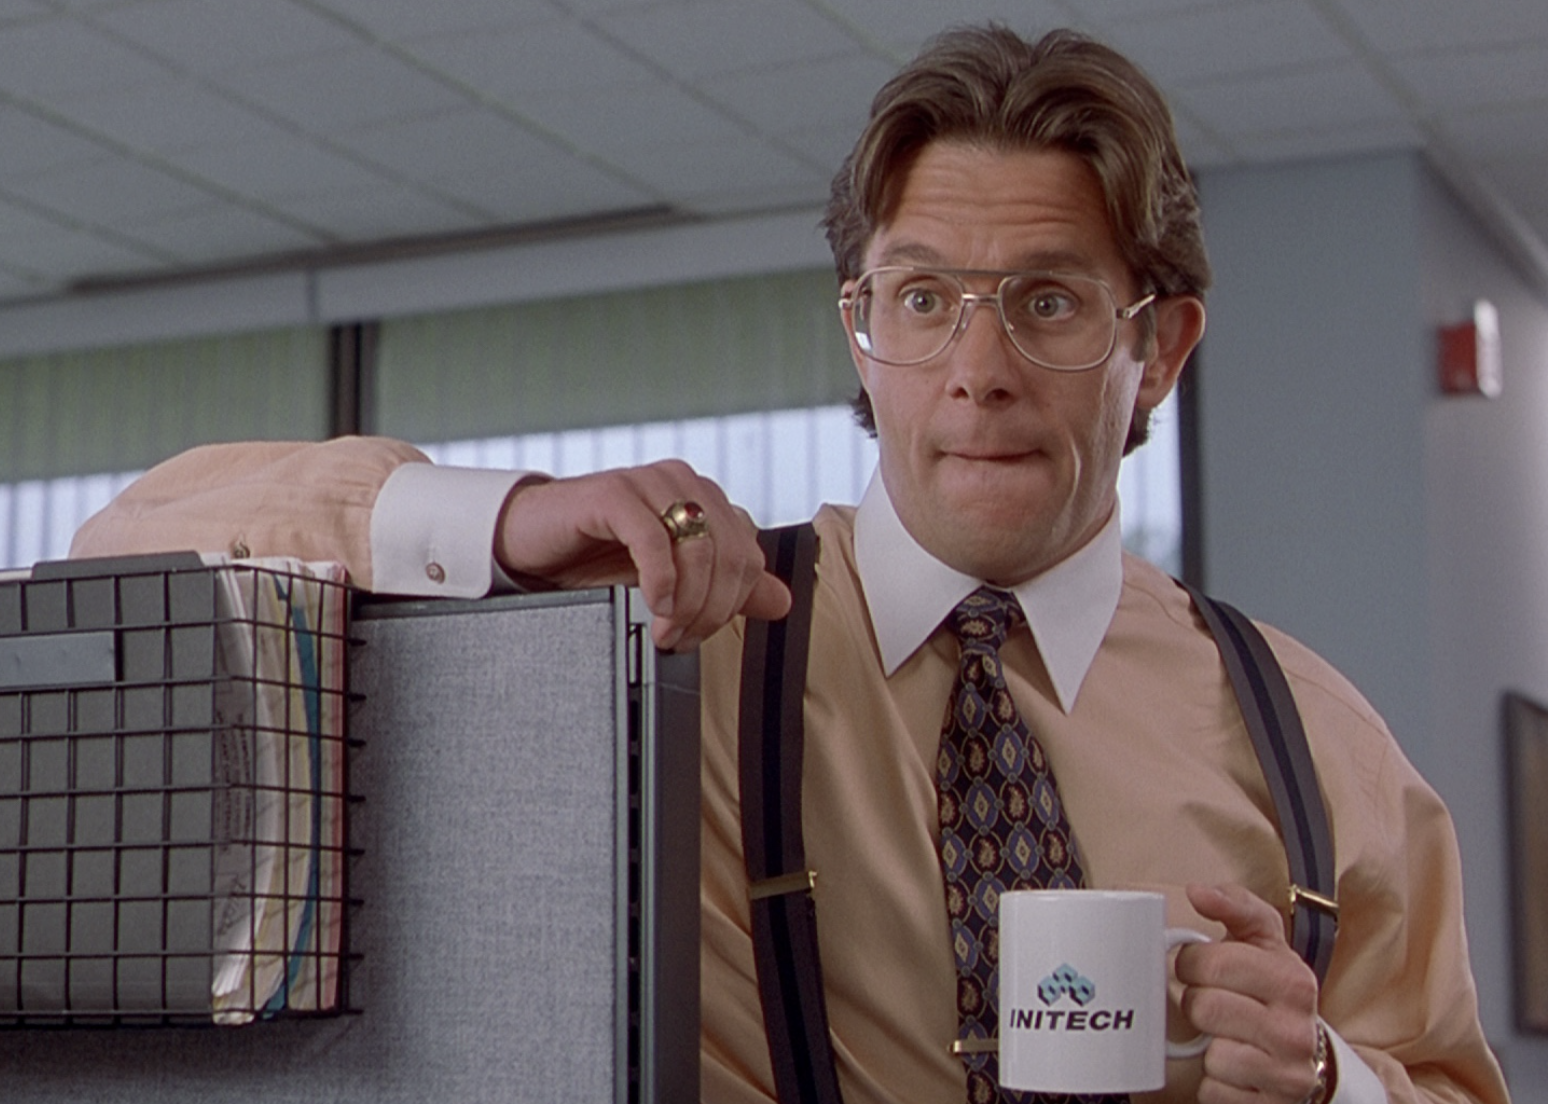 Gary Cole in a scene from "Office Space"